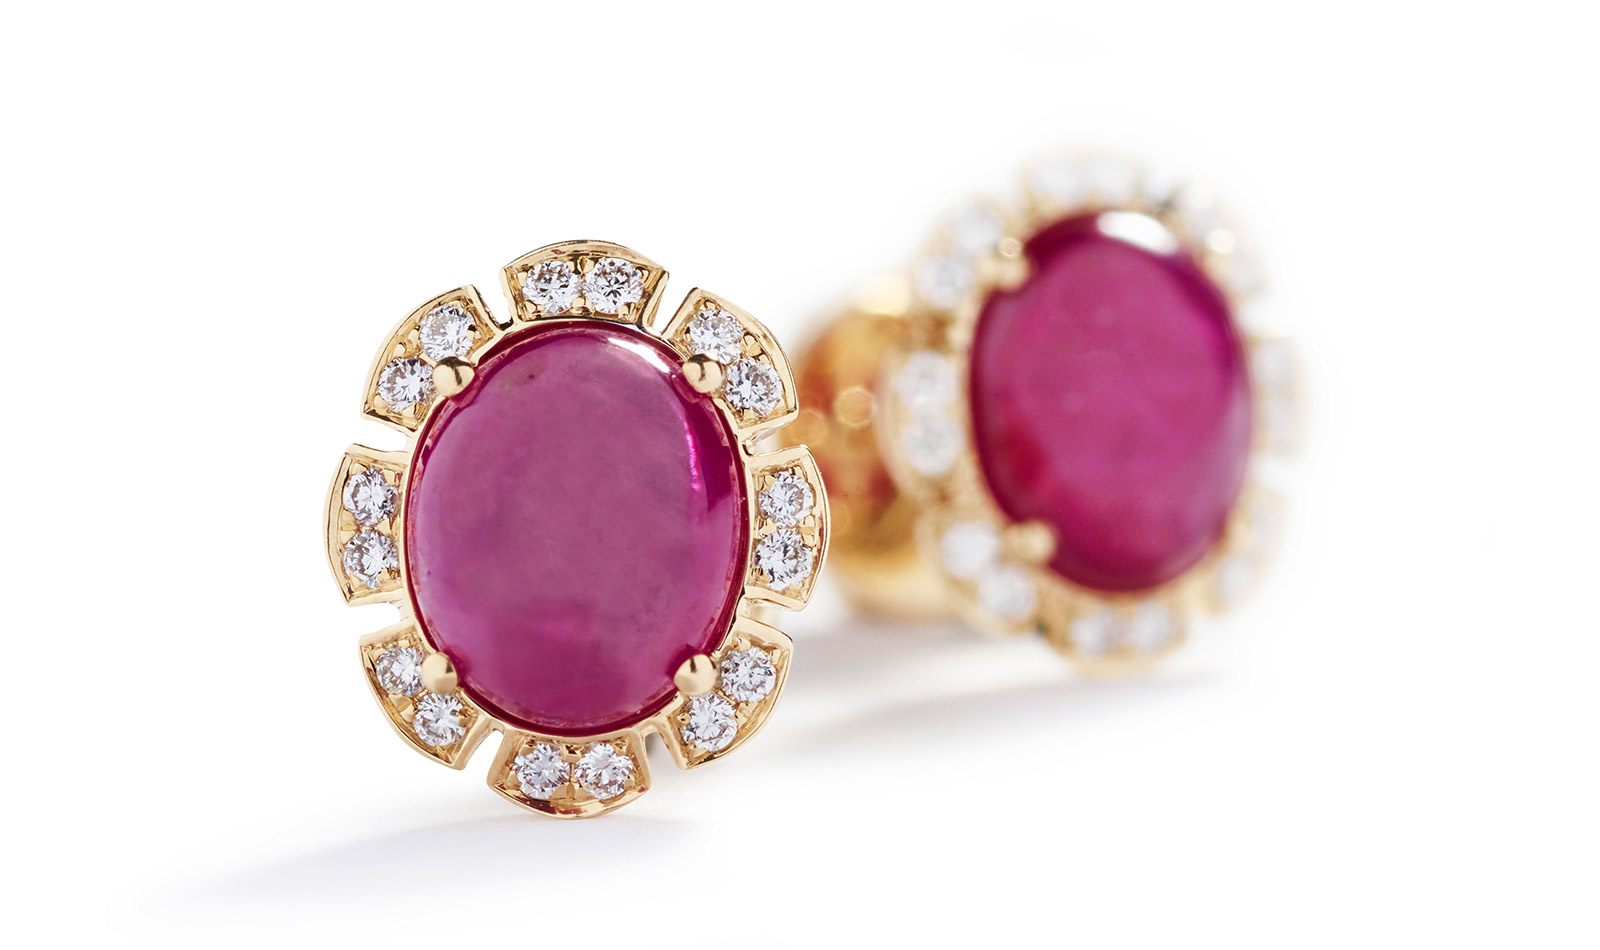 Hartmann's earrings with 2.96 cts Greenland rubies